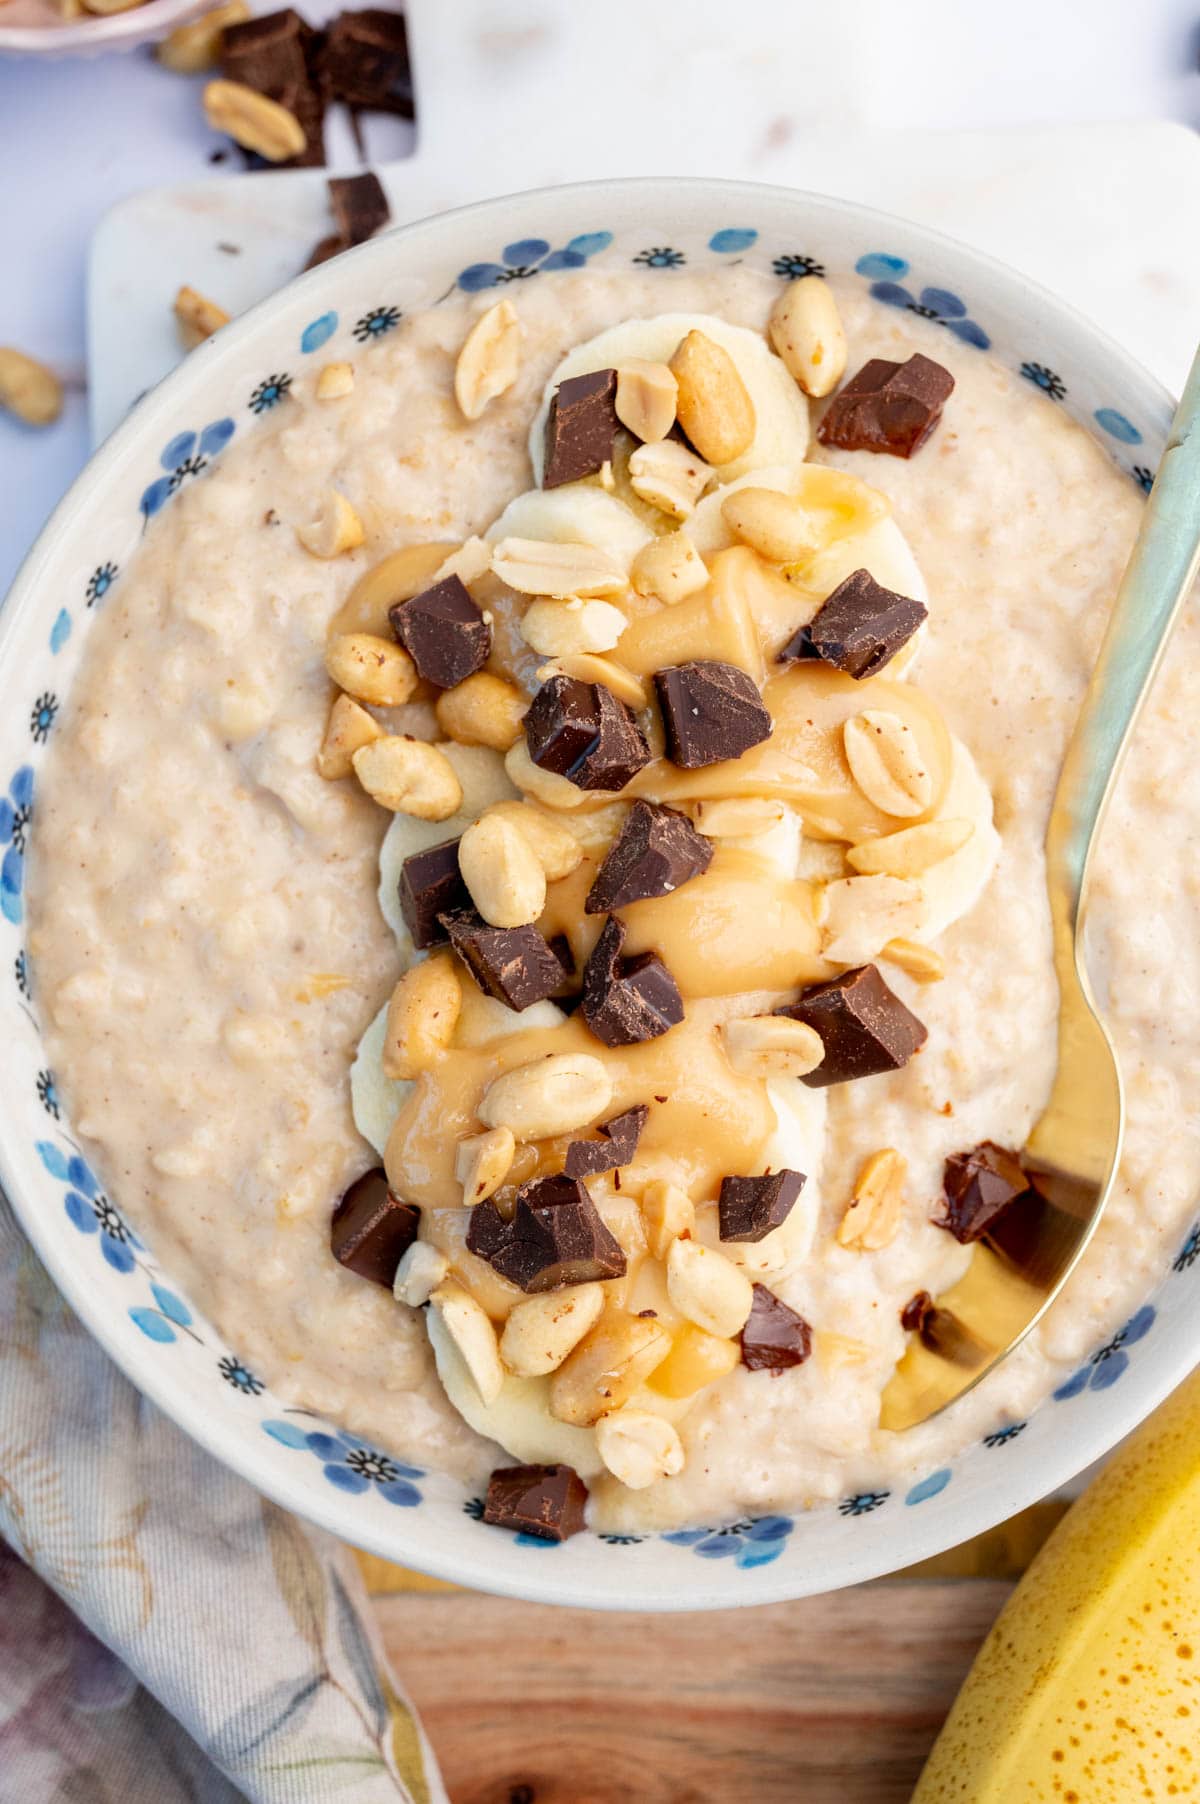 Banana peanut butter oatmeal in a white-blue bowl topped with banana slices, chocolate, and peanuts.